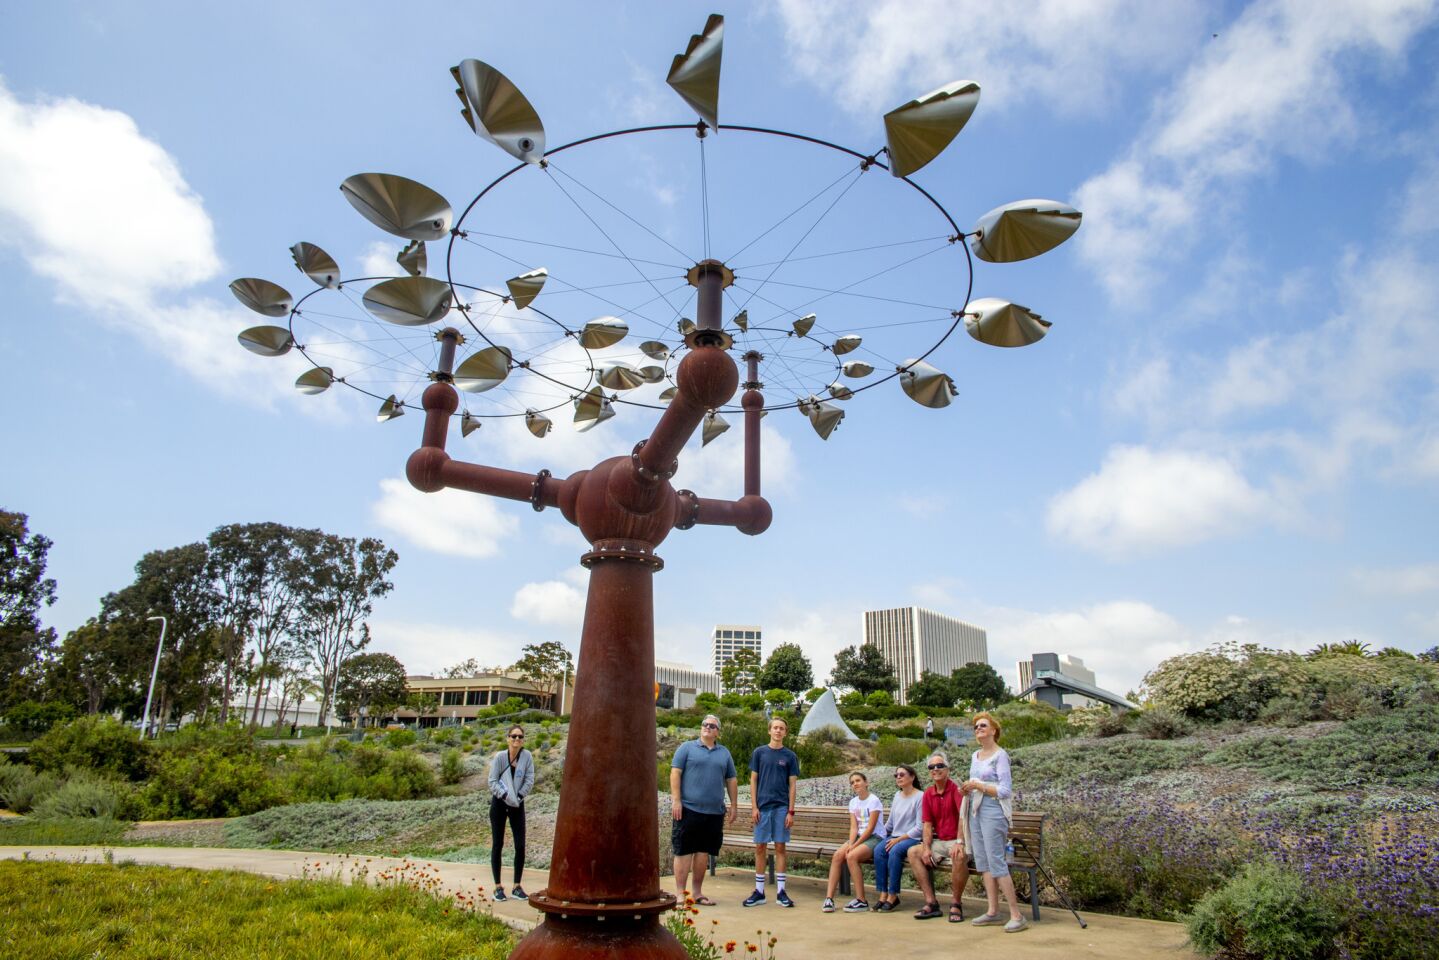 "Getting Your Bearings" by David Boyer draws an interested crowd at Newport Beach’s Civic Center Park on Saturday.